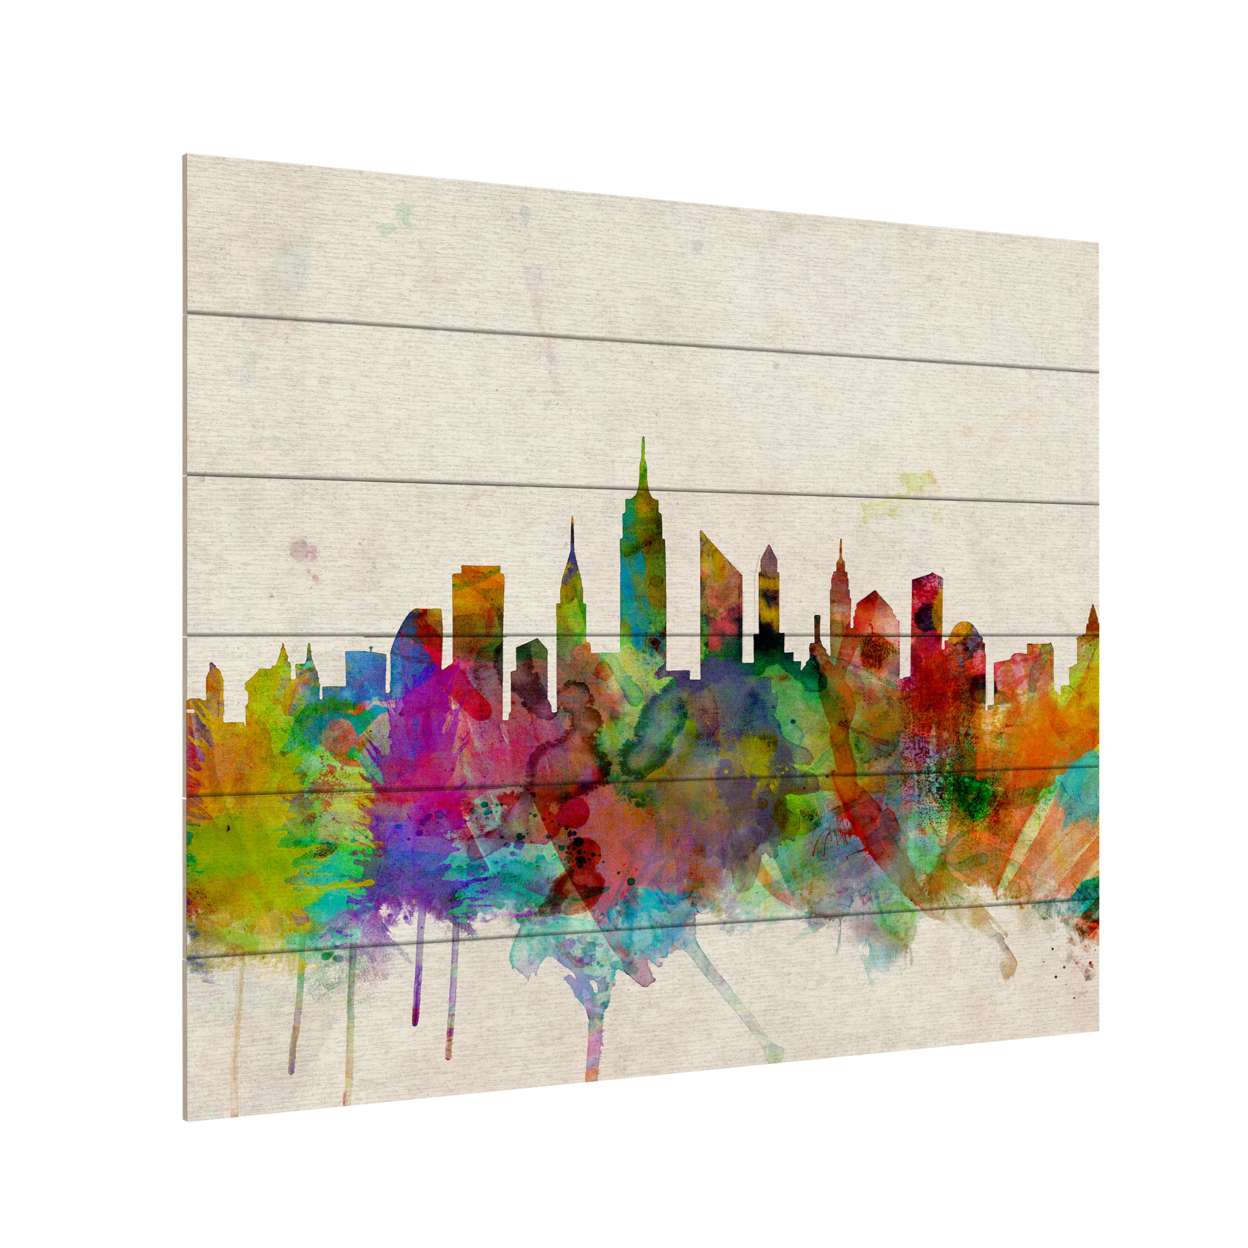 Wooden Slat Art 18 X 22 Inches Titled New York Skyline Tompsett Ready To Hang Home Decor Picture